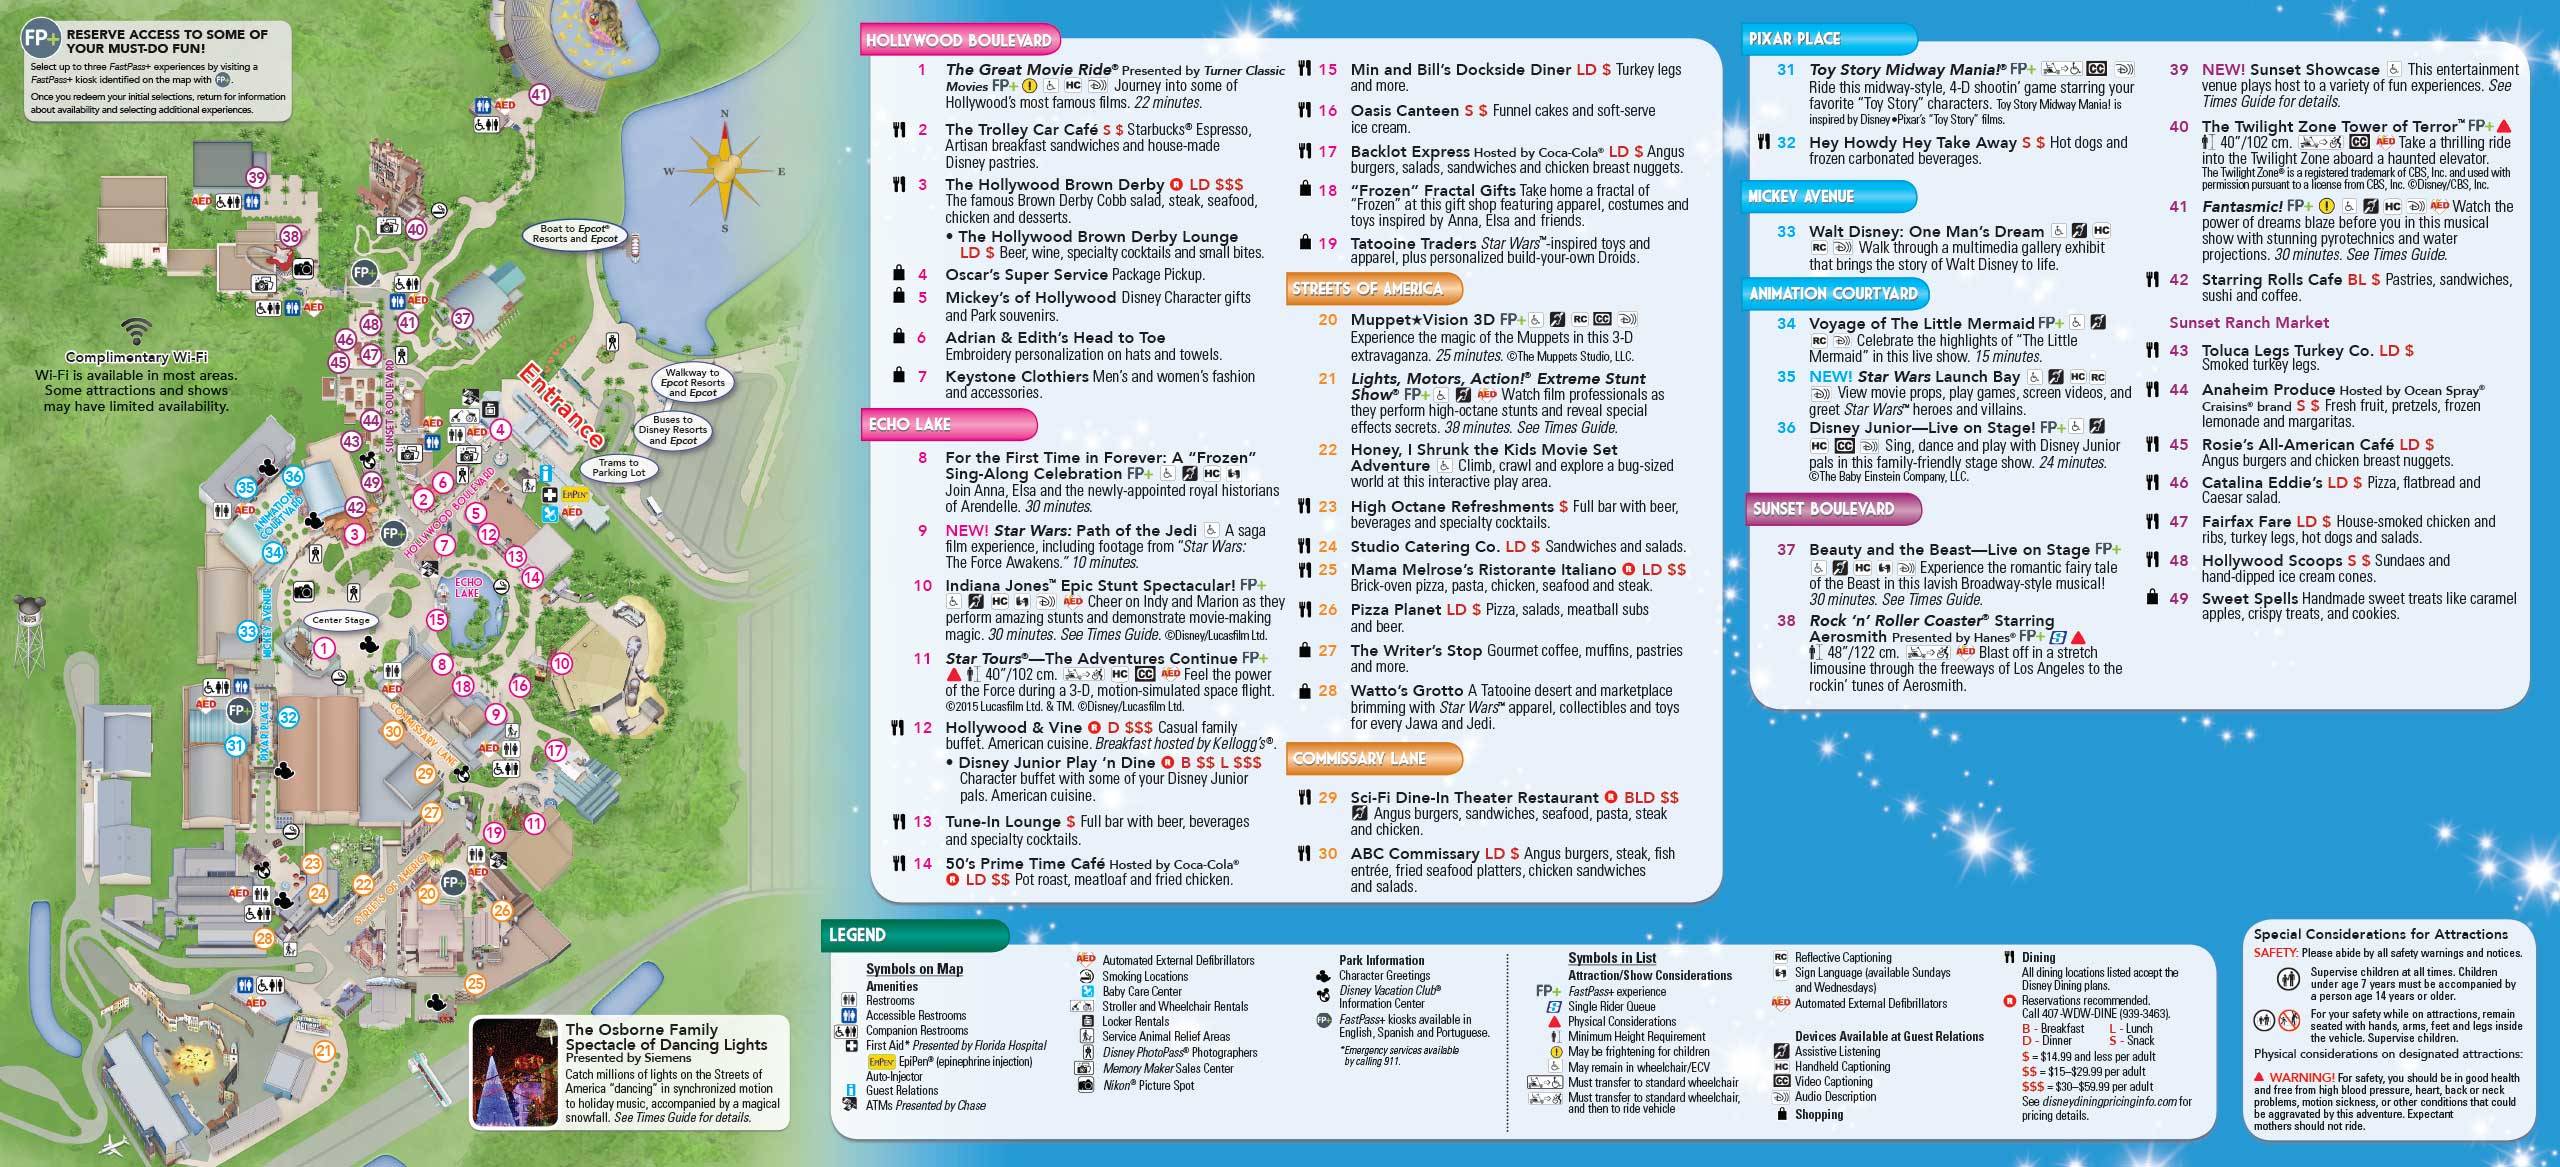 PHOTO - Disney's Hollywood Studios guide map updated to include Star Wars Launch Bay, Sunset Showcase and more